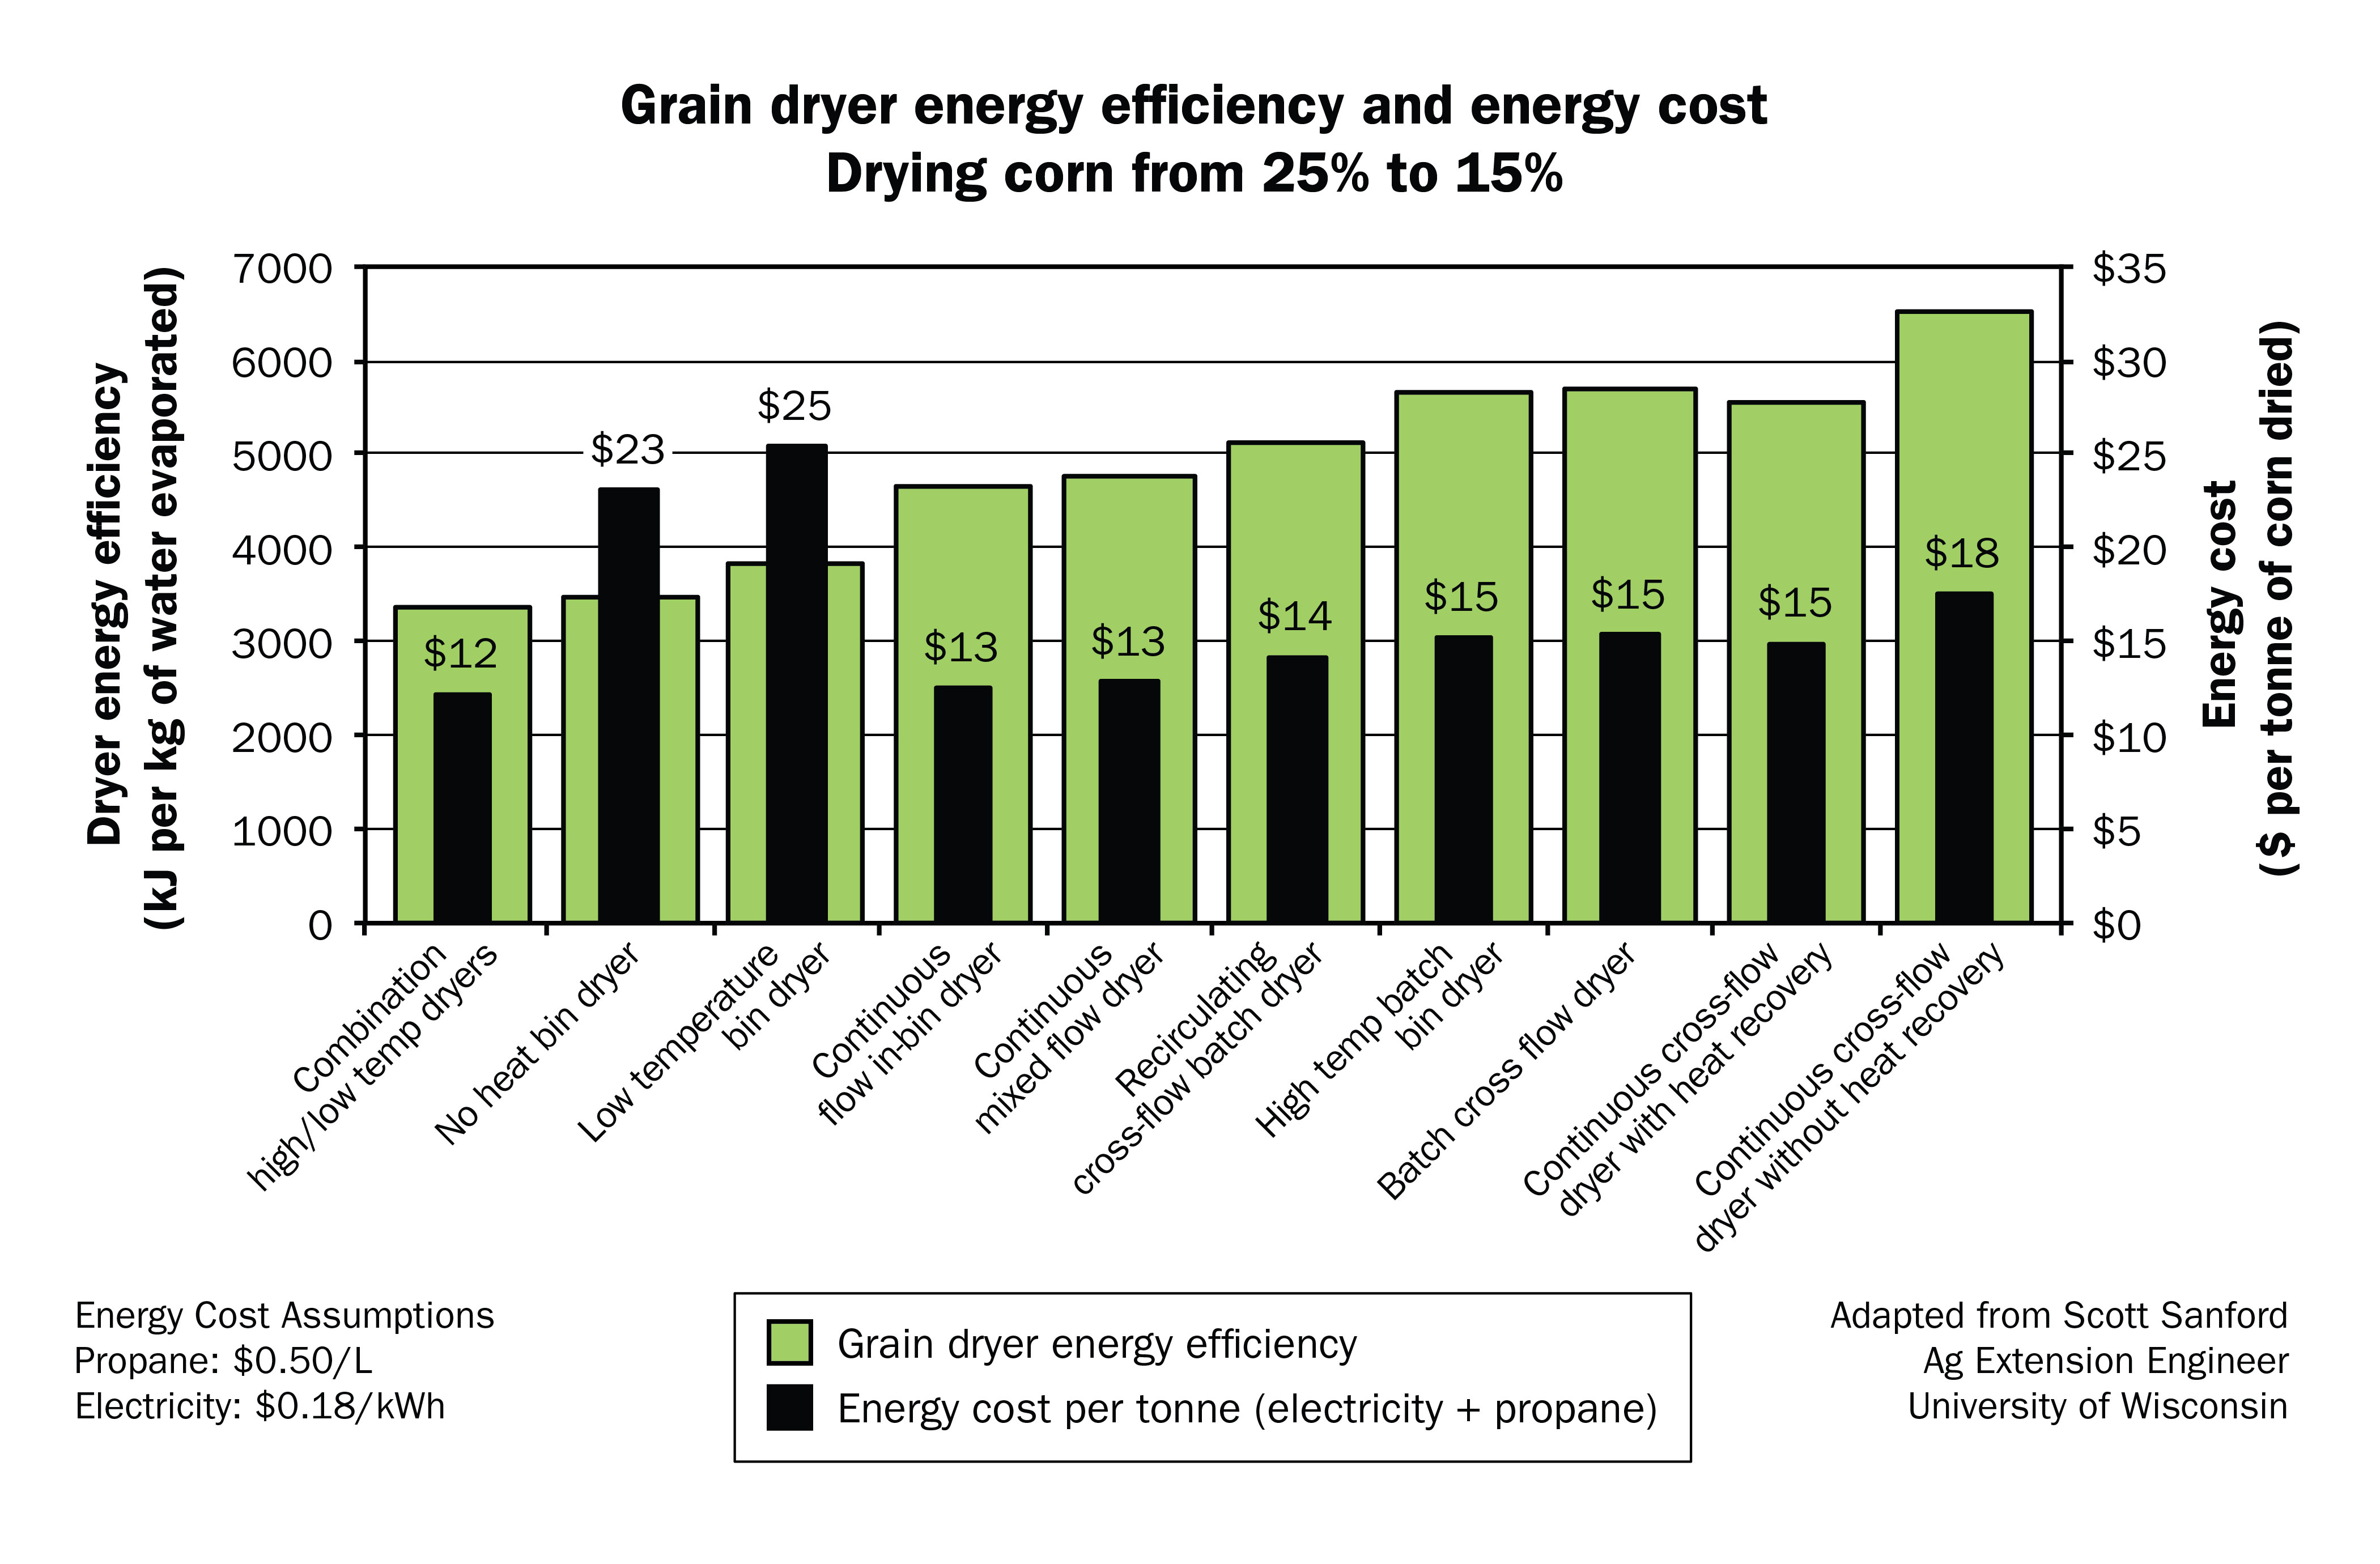 Energy use per kilogram of water evaporated and the cost per tonne of drying corn for all major grain dryer types